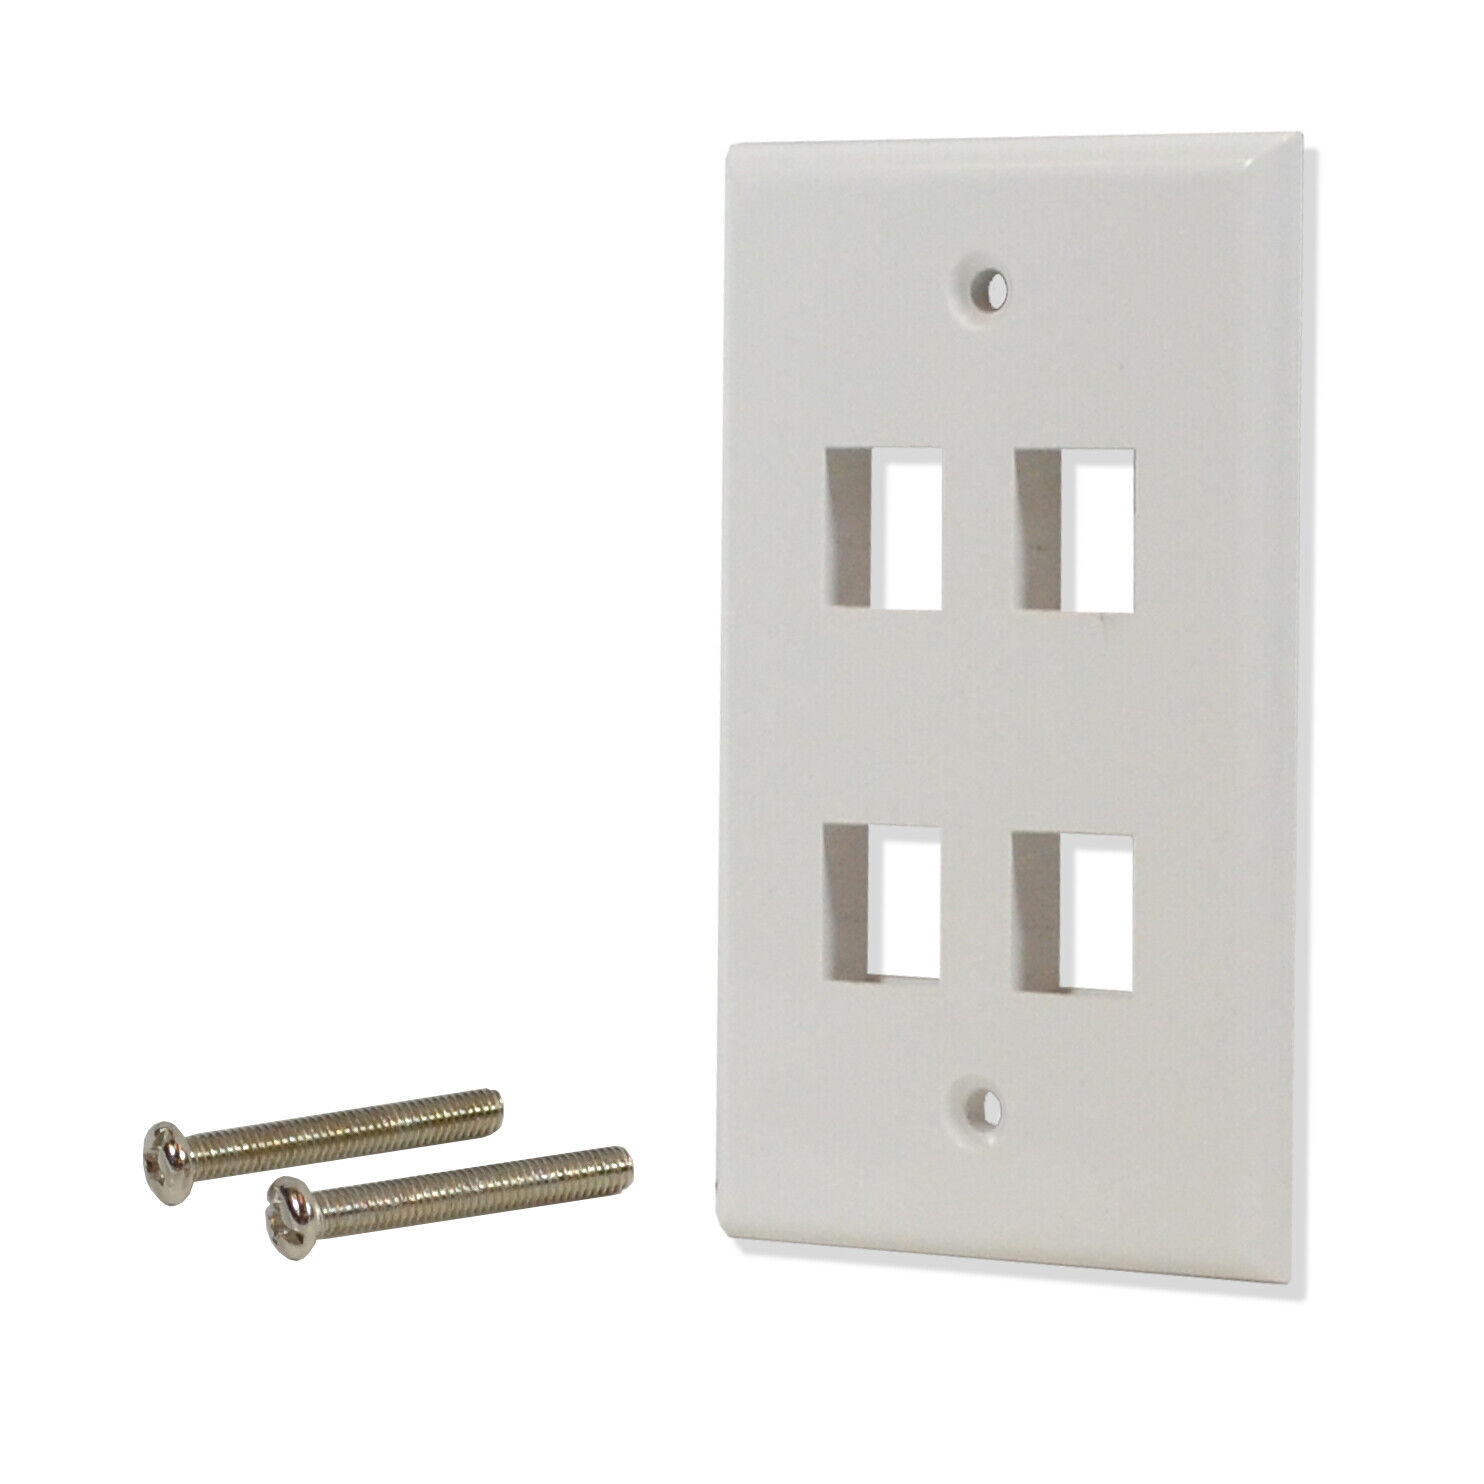 Primary image for 10 Pack Lot 4 port Hole Keystone Jack Wall Plate Smooth Surface White